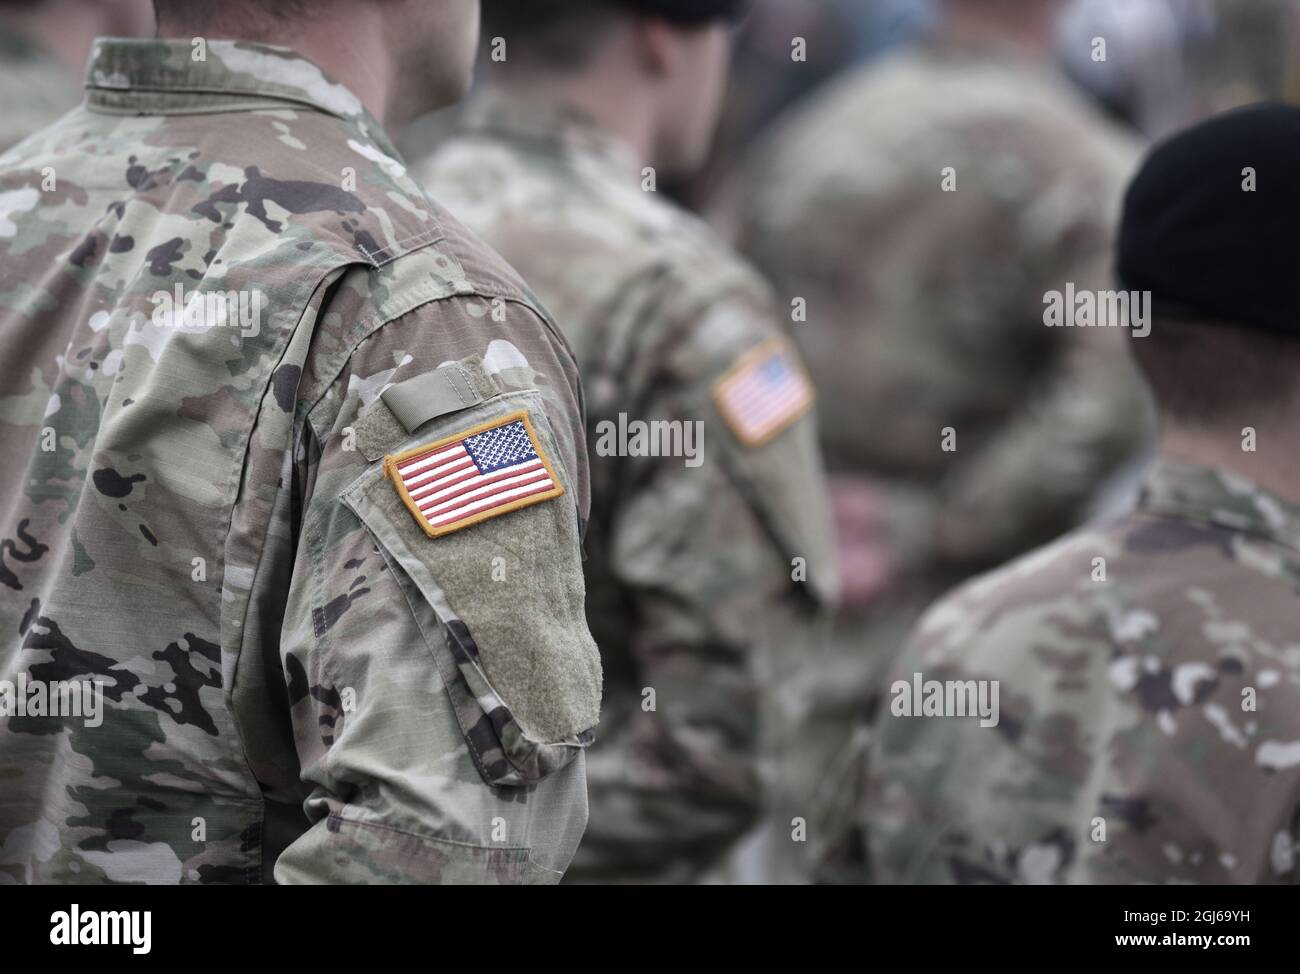 US soldiers. US army. USA patch flag on the US military uniform. Soldiers on the parade ground from the back. Veterans Day. Memorial Day. Stock Photo